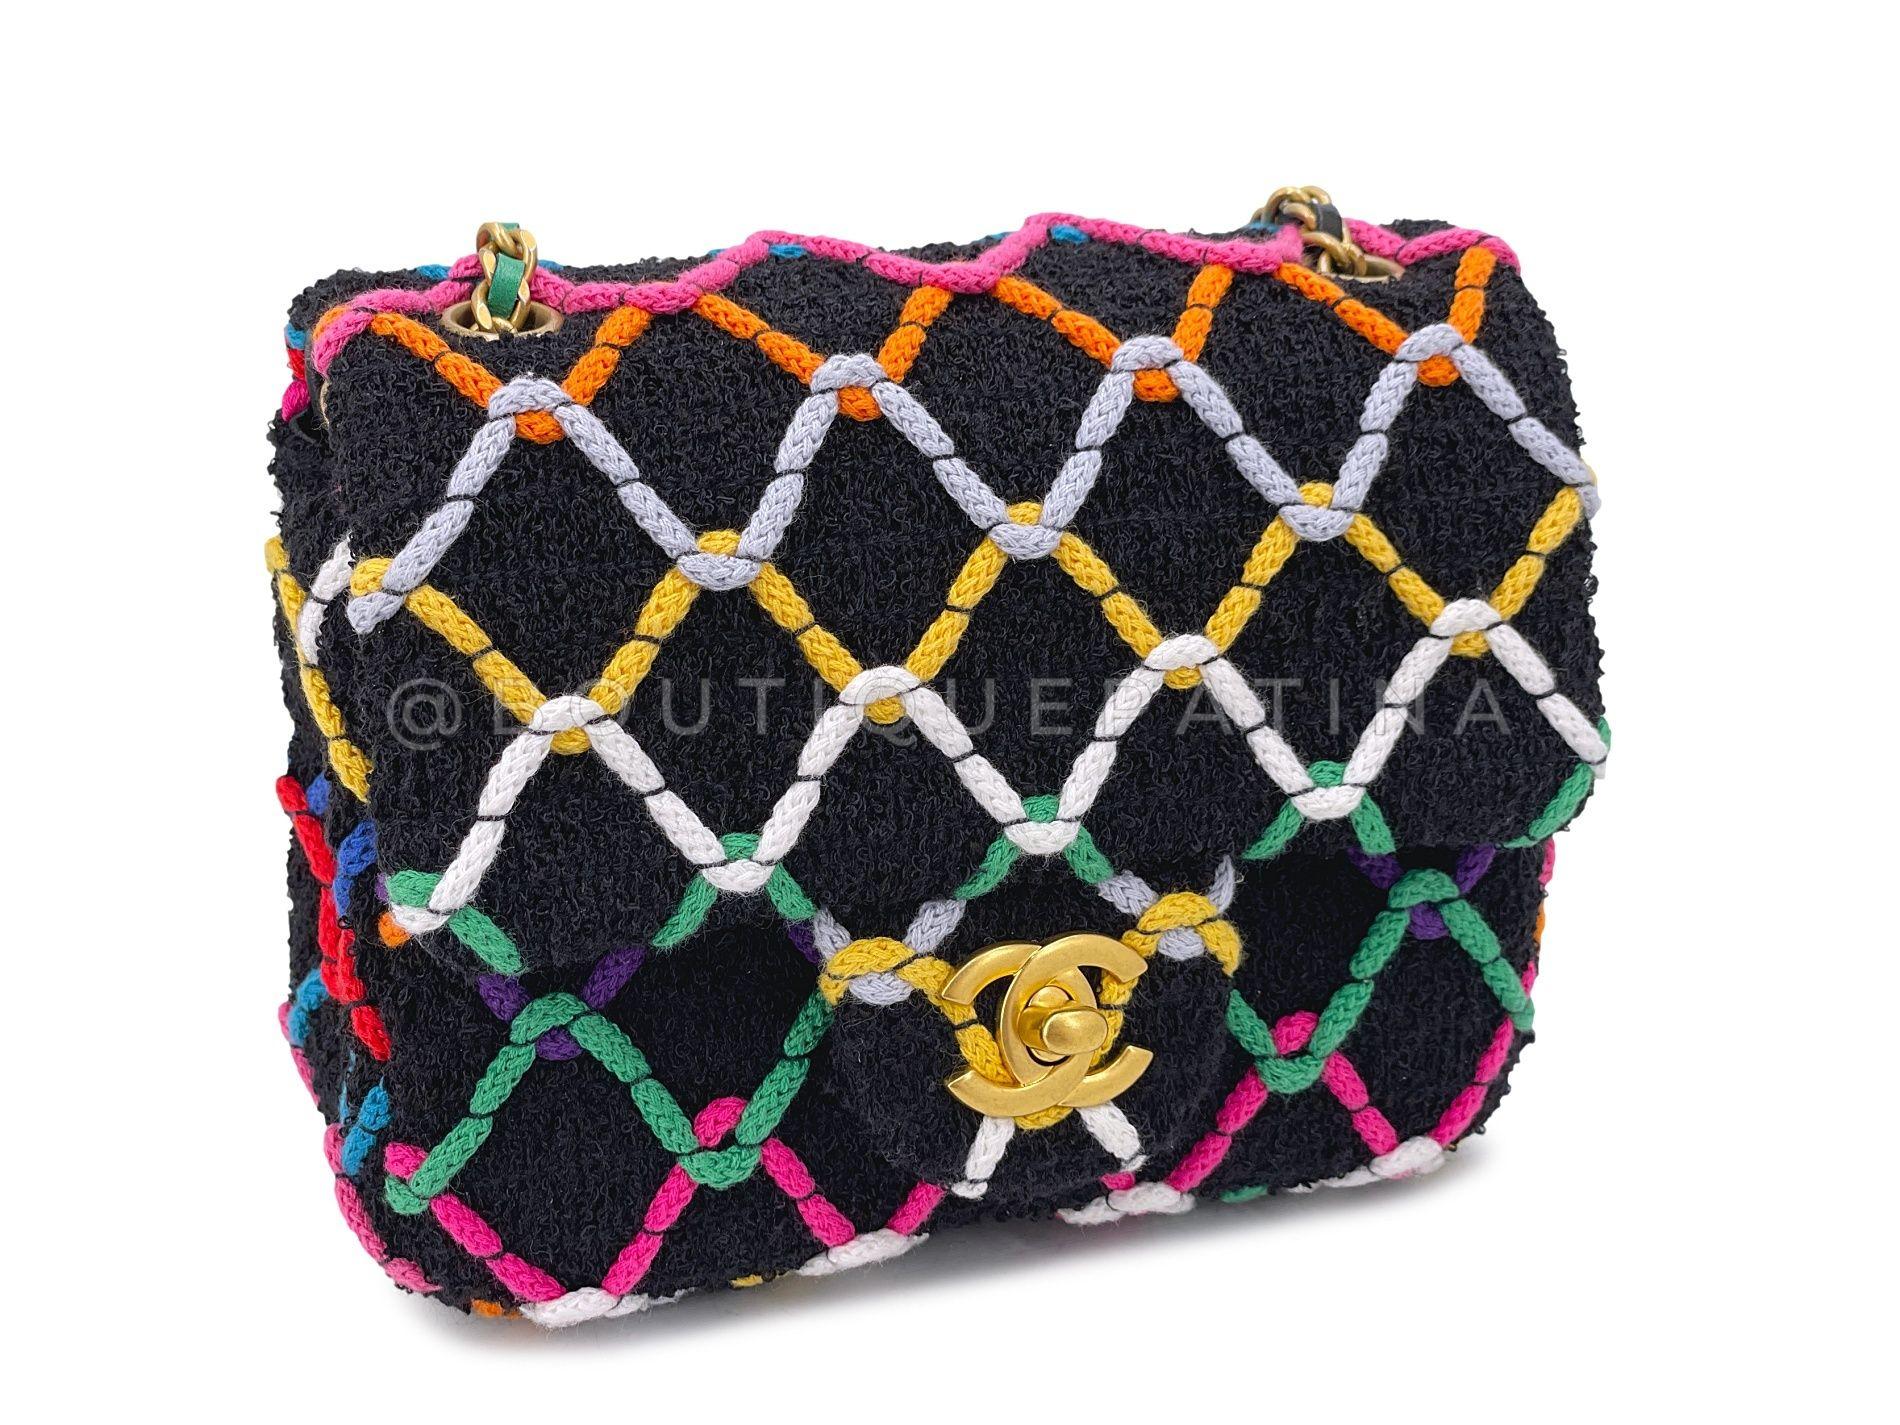 Chanel 2022 Rainbow Roped Square Mini Pearl Crush Flap Bag GHW 67900 In Excellent Condition For Sale In Costa Mesa, CA